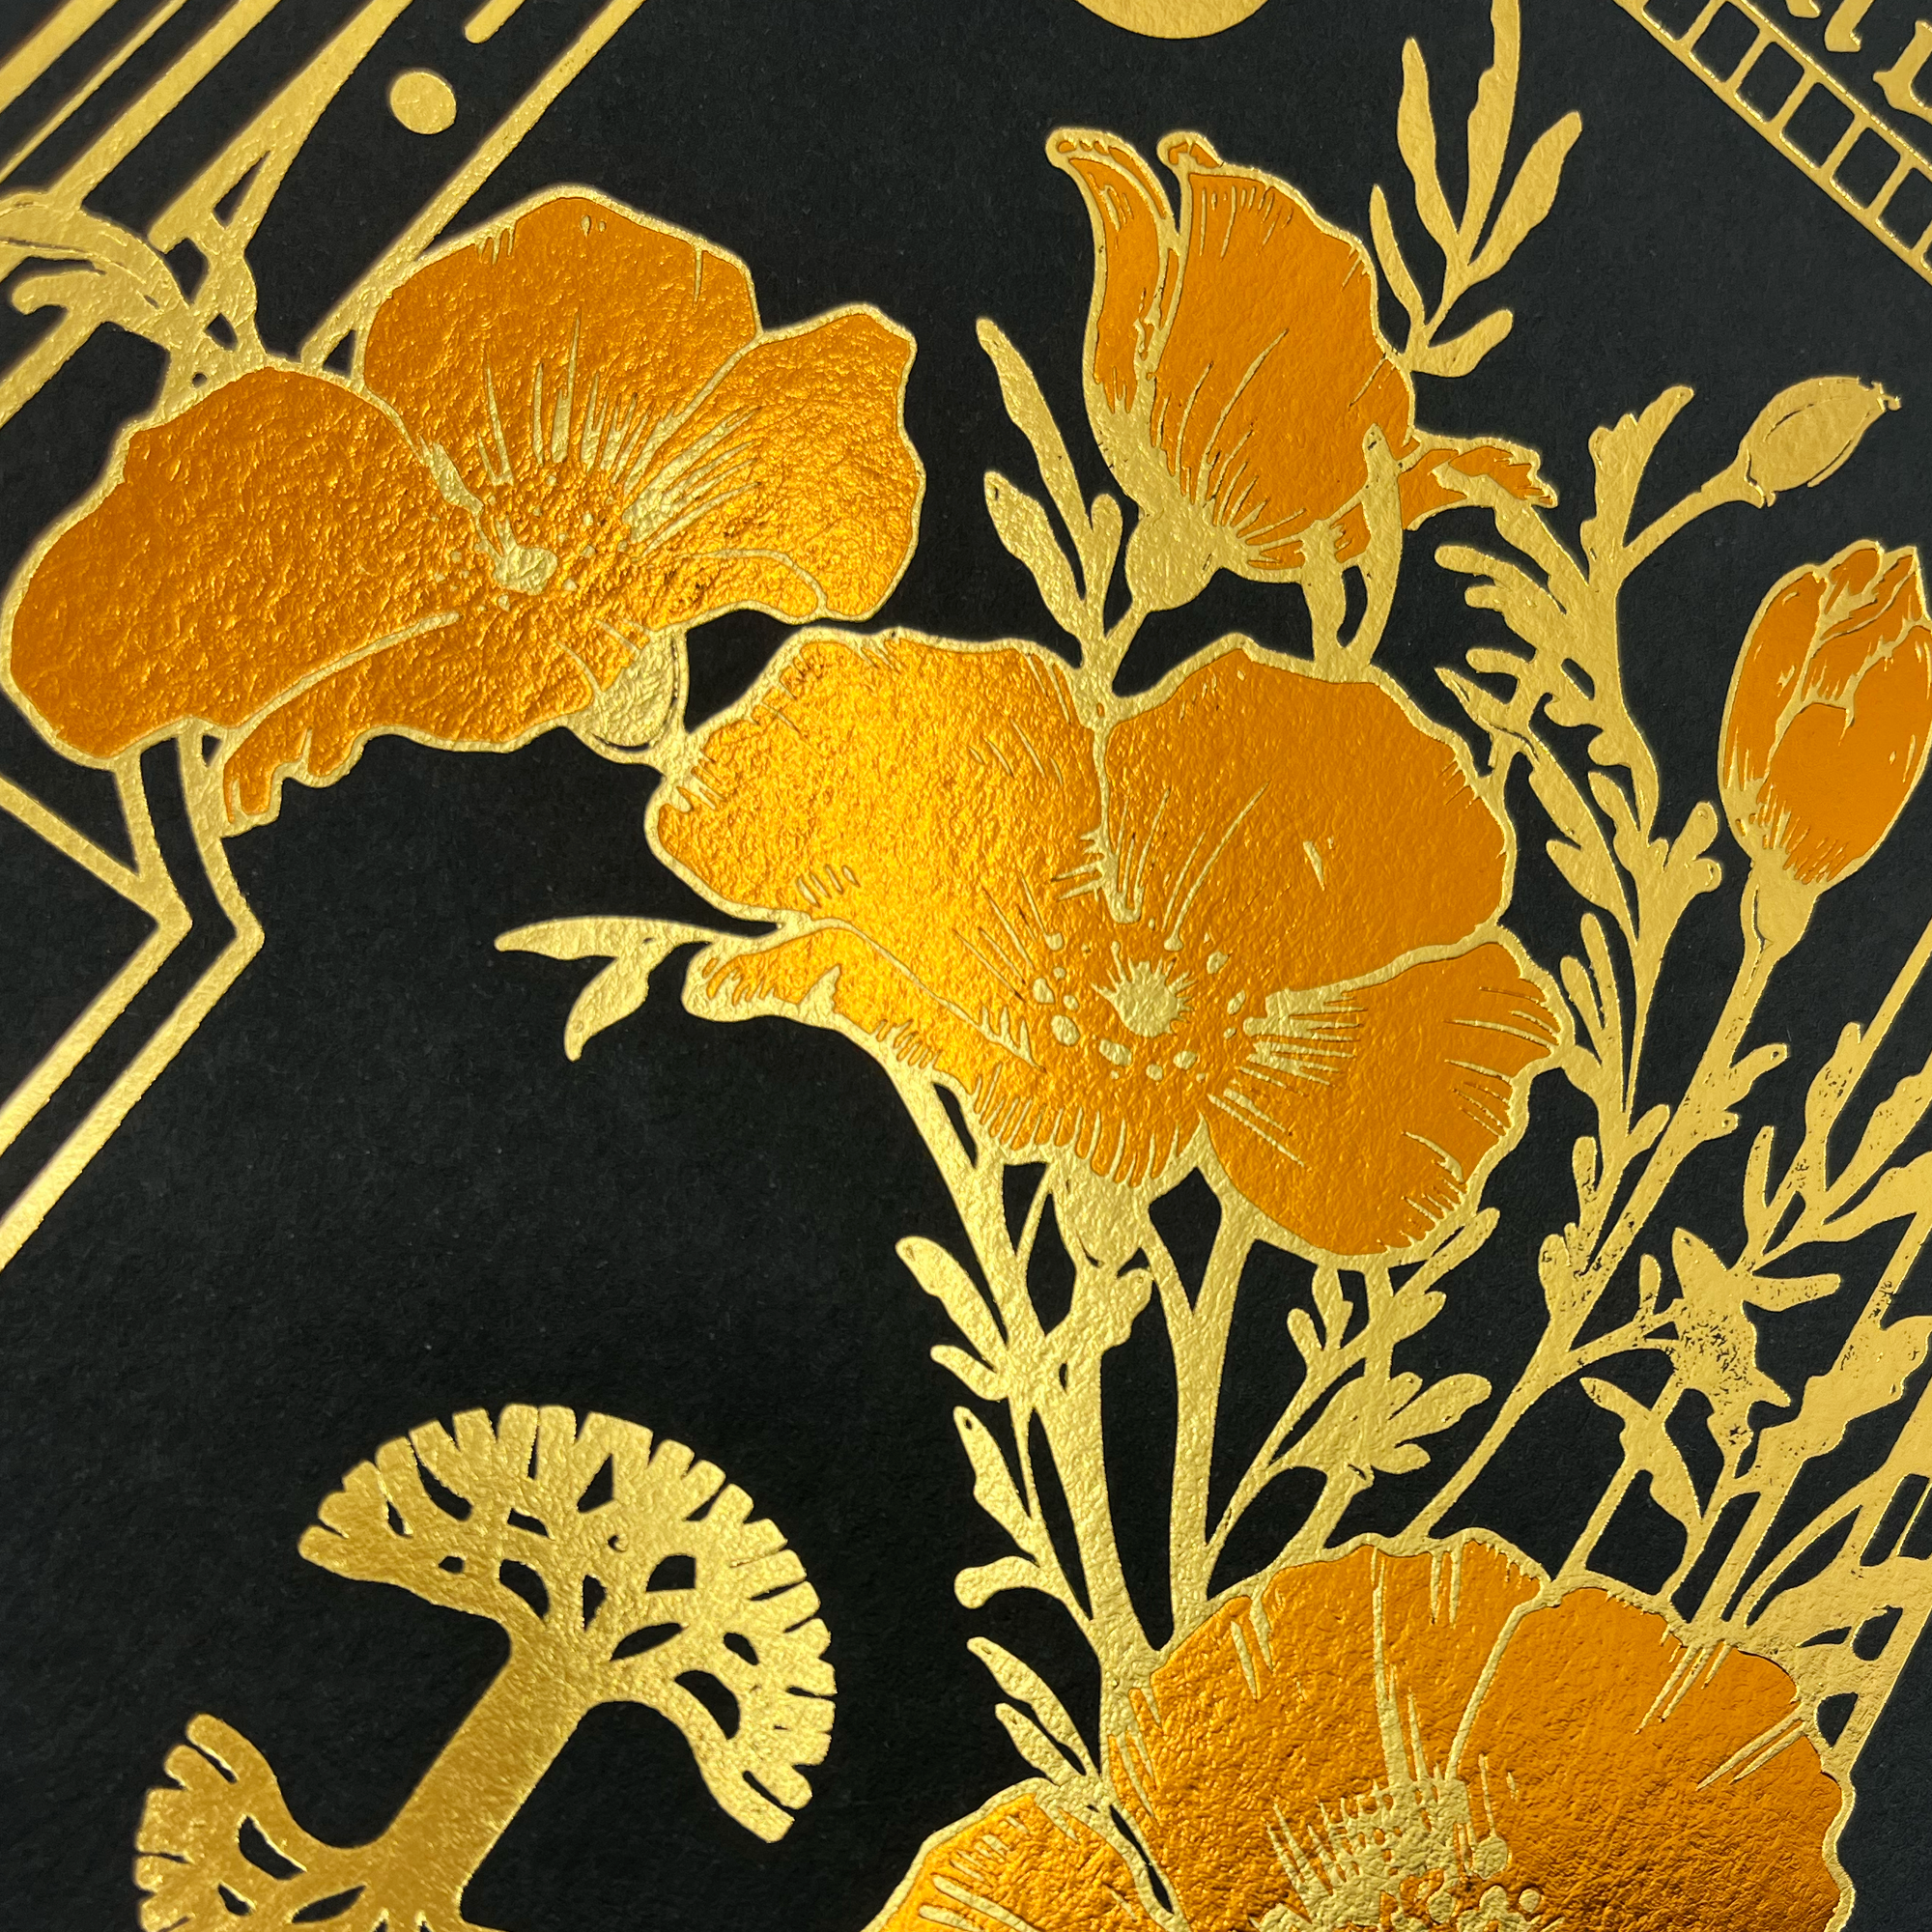 Detailed close-up of best-selling Oaklandish Blossom graphic on a black and gold poster.